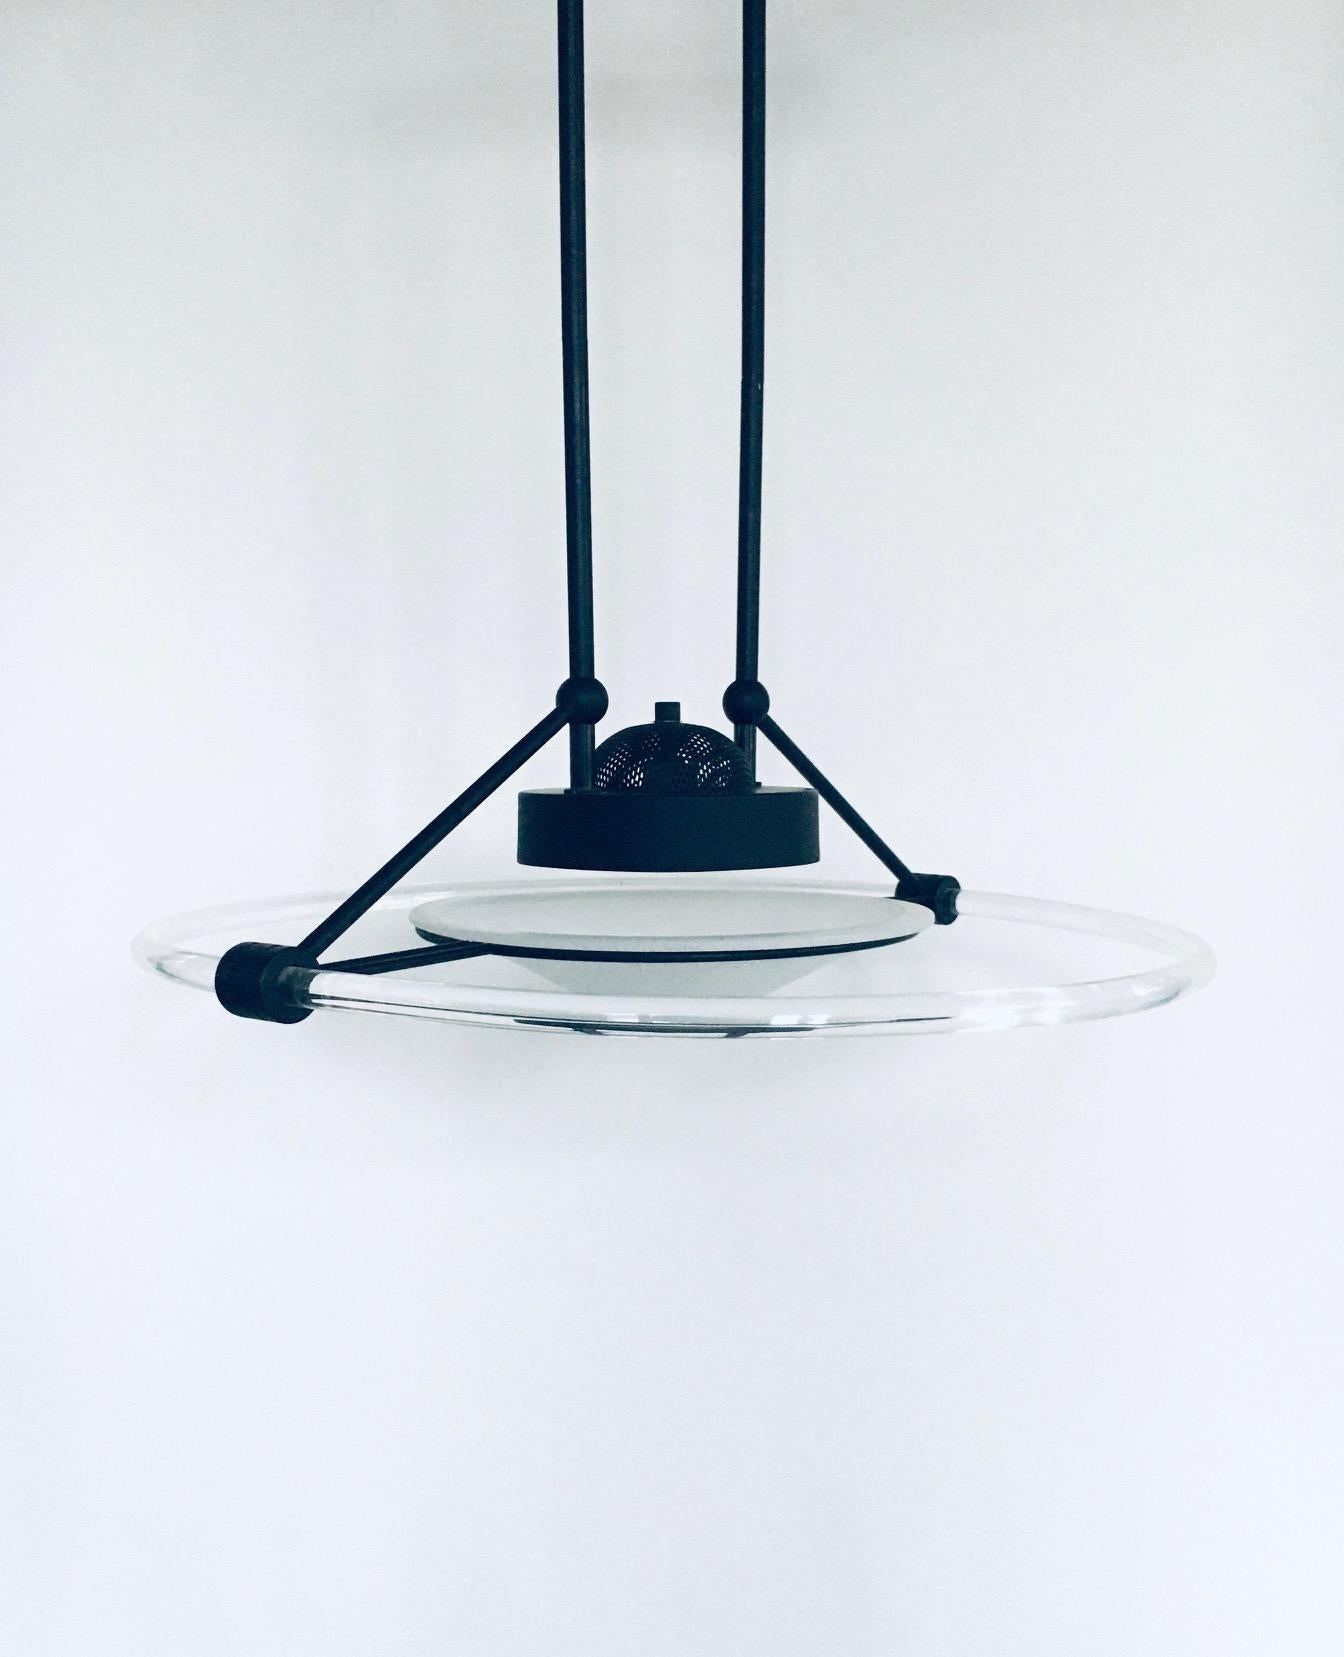 Vintage Memphis style pendant lamp, made in Italy 1980's. Black metal with perspex ring and white opaline glass on this modern design hanging pendant lamp. Halogen lamp in working condition. The lamp comles in very good original condition. Measures